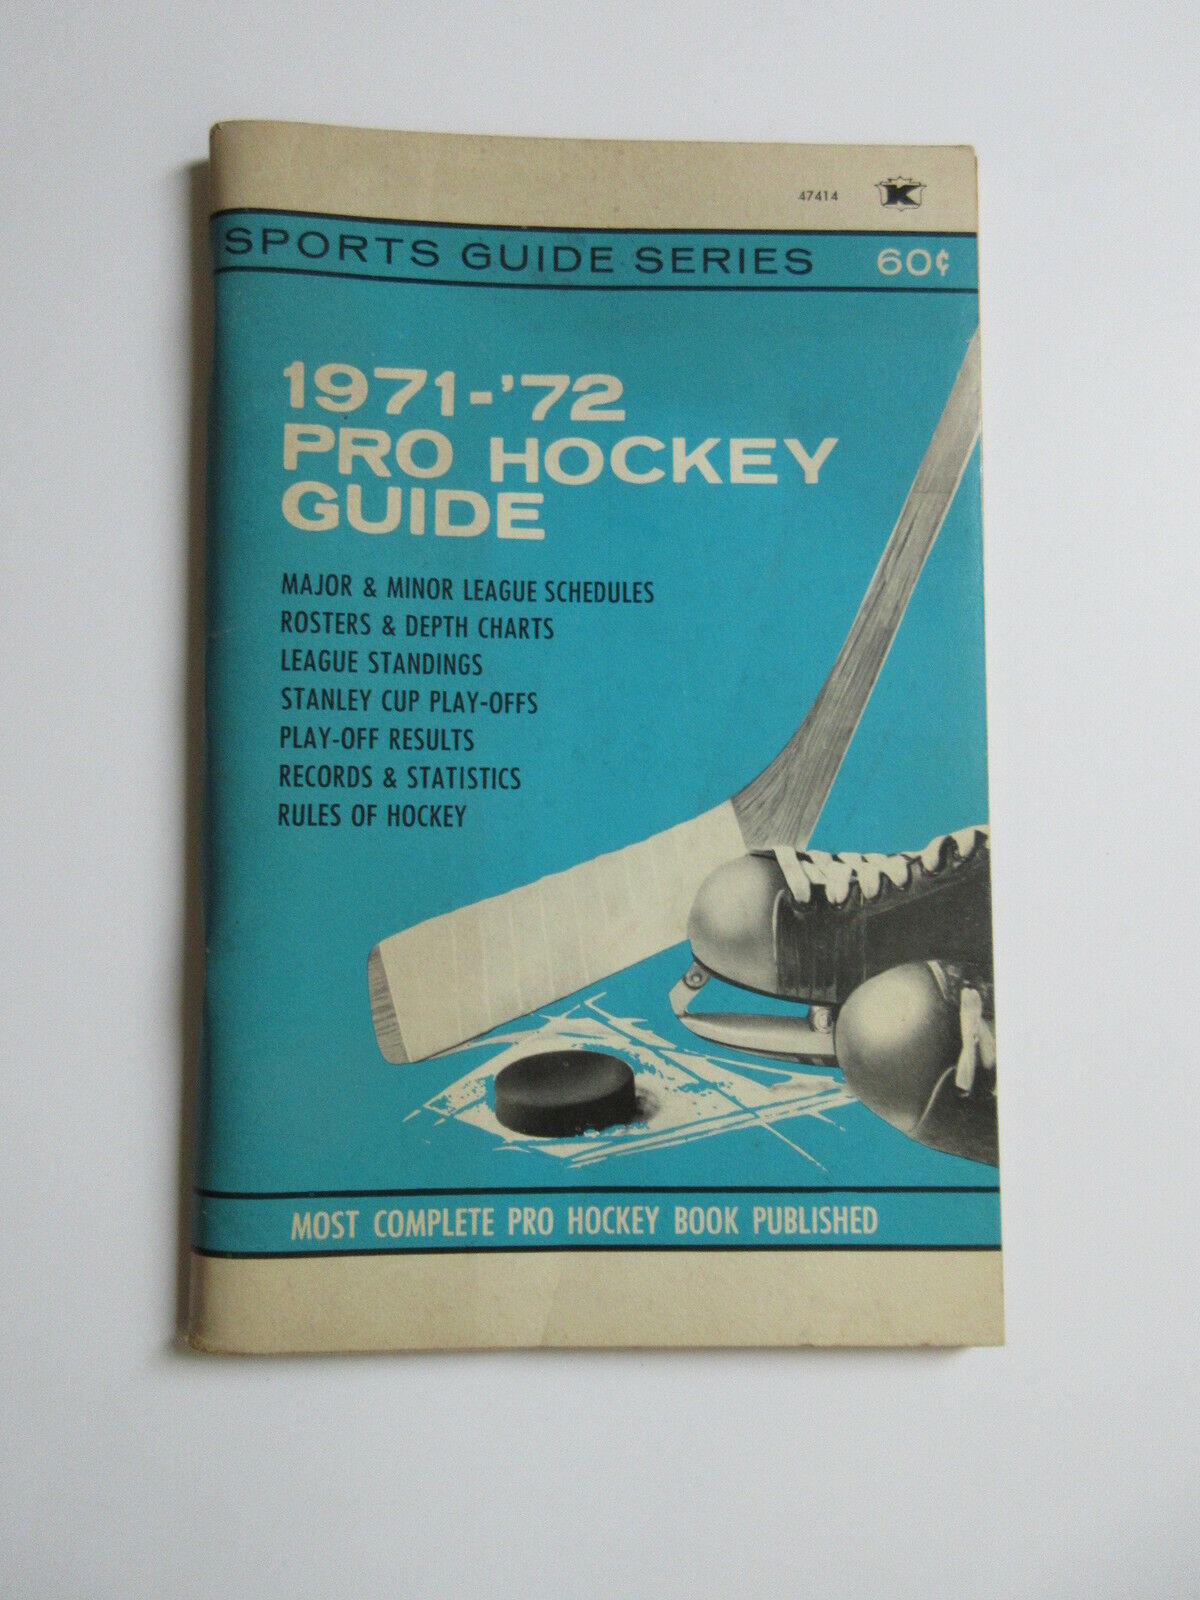 1971 1972 PRO HOCKEY GUIDE booklet SPORT GUIDE SERIES NHL MINOR LEAGUES